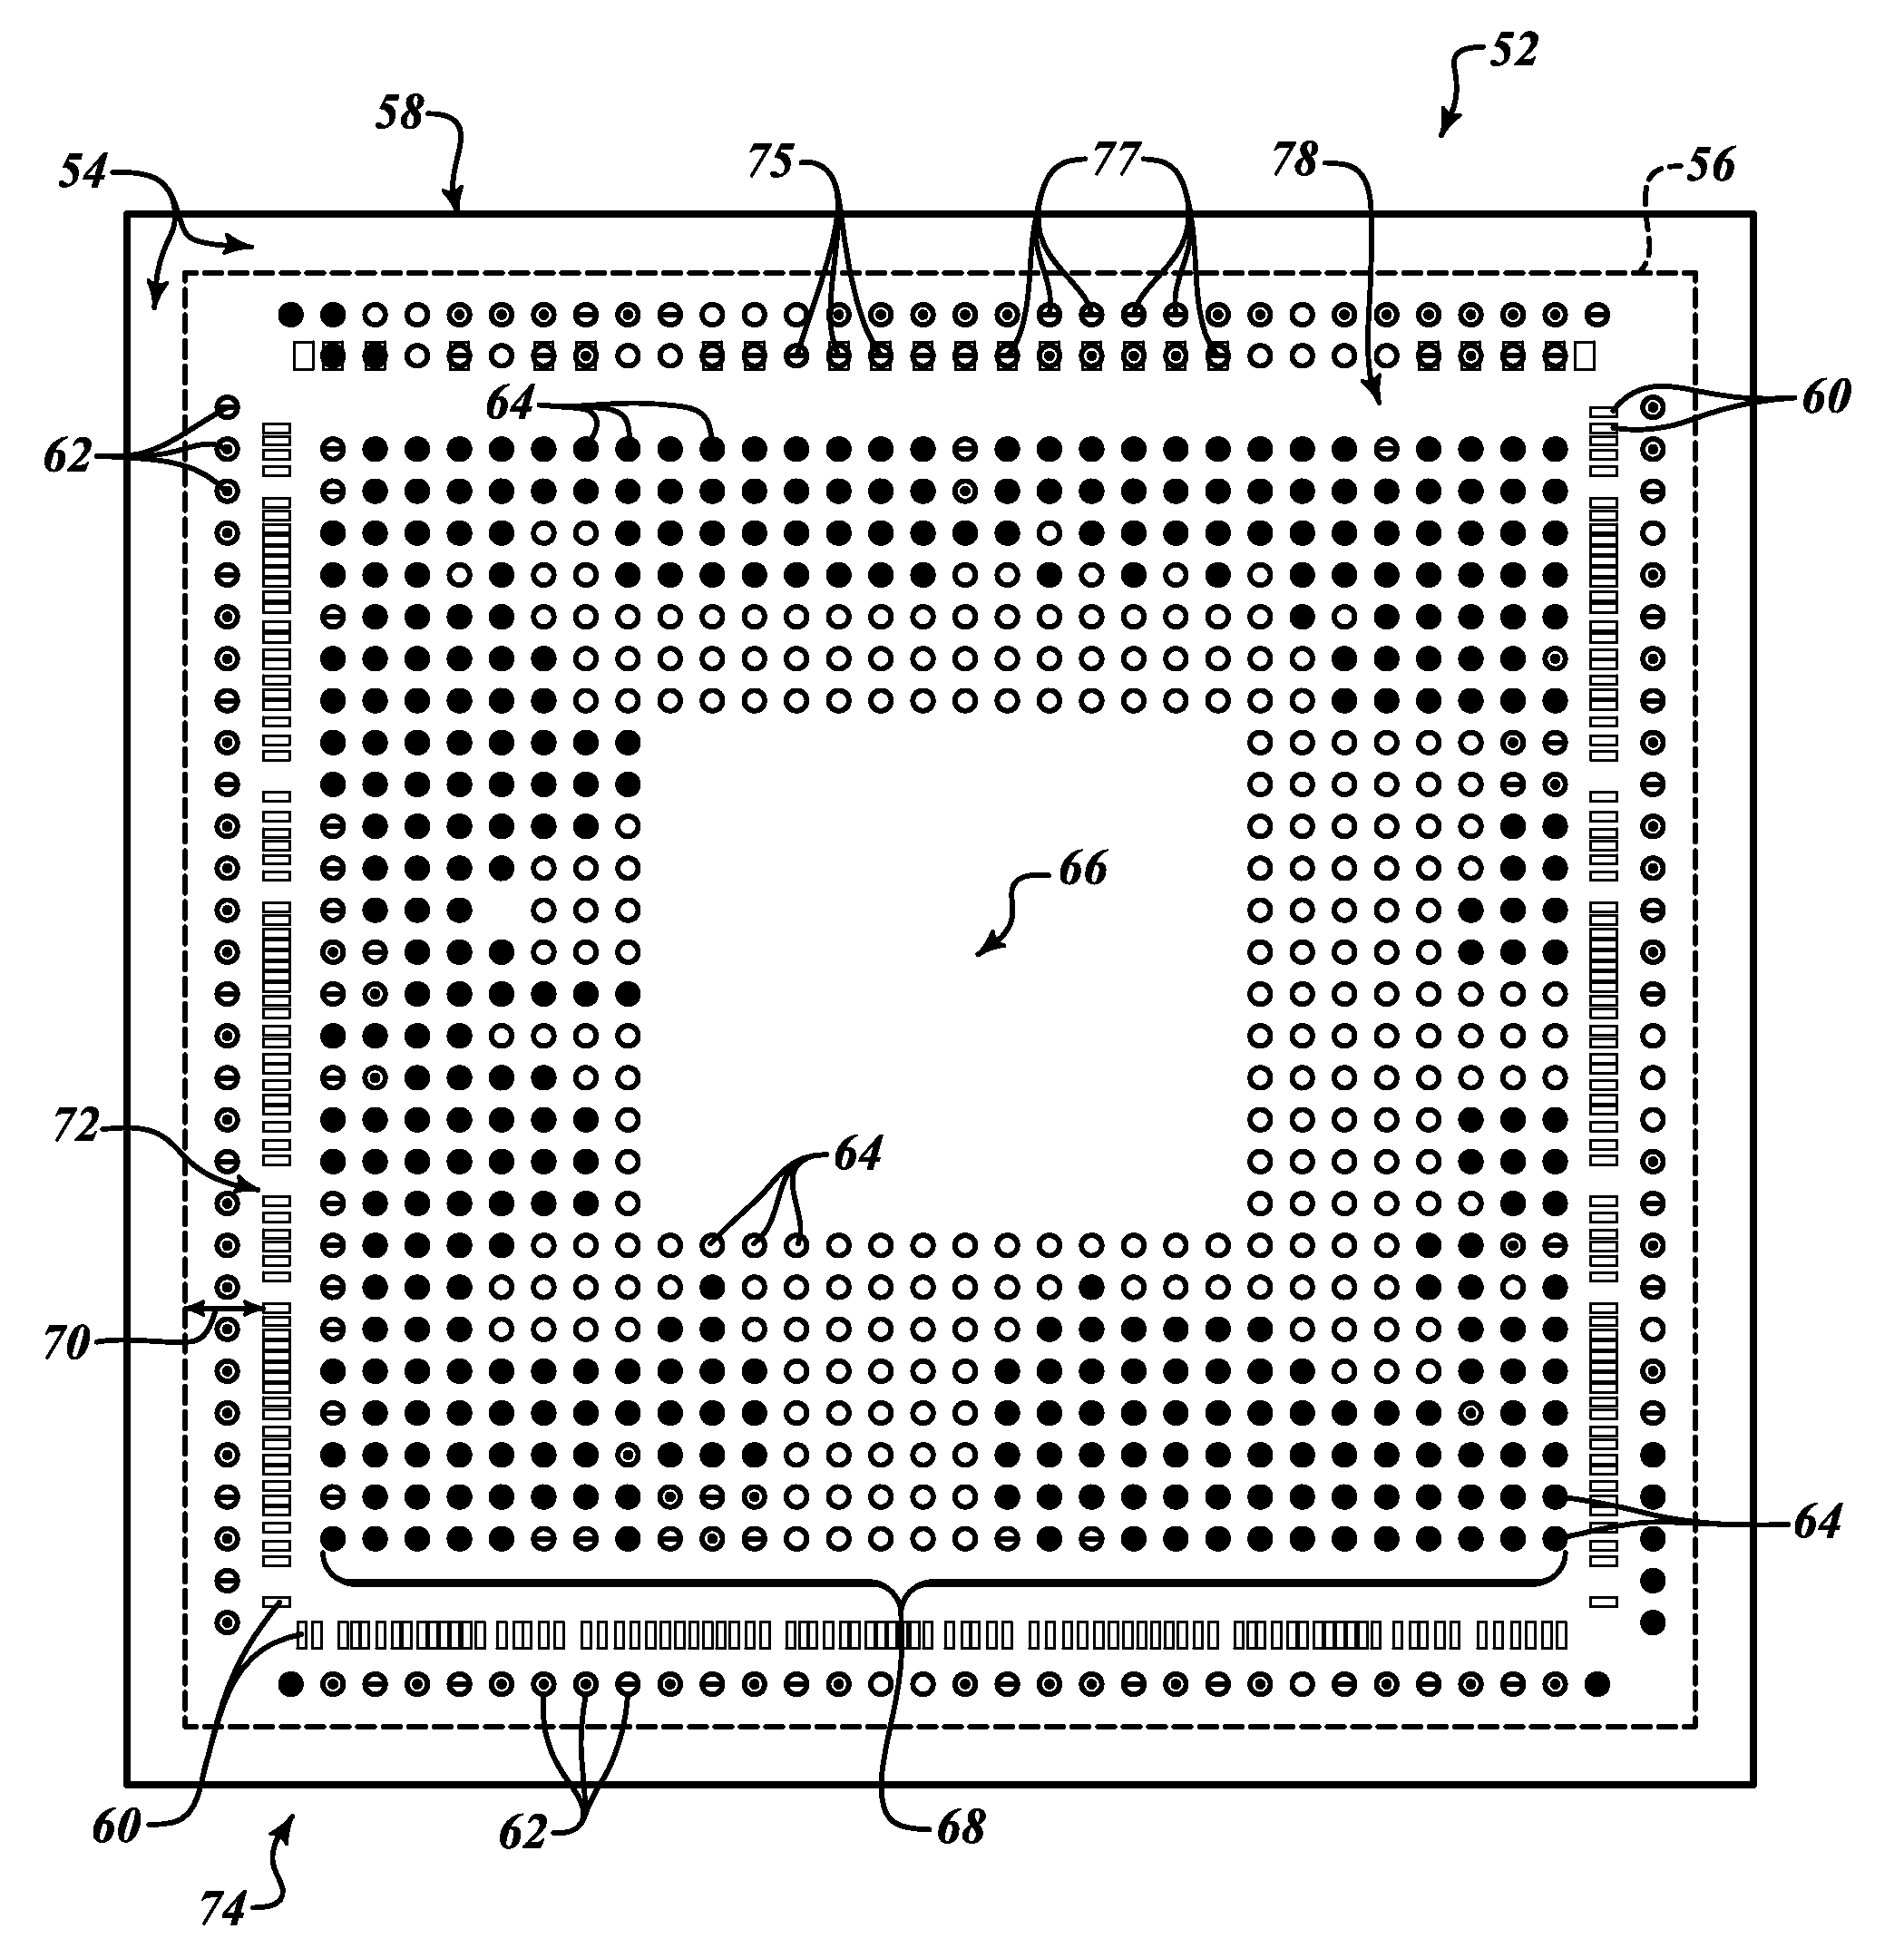 Flip chip device having simplified routing